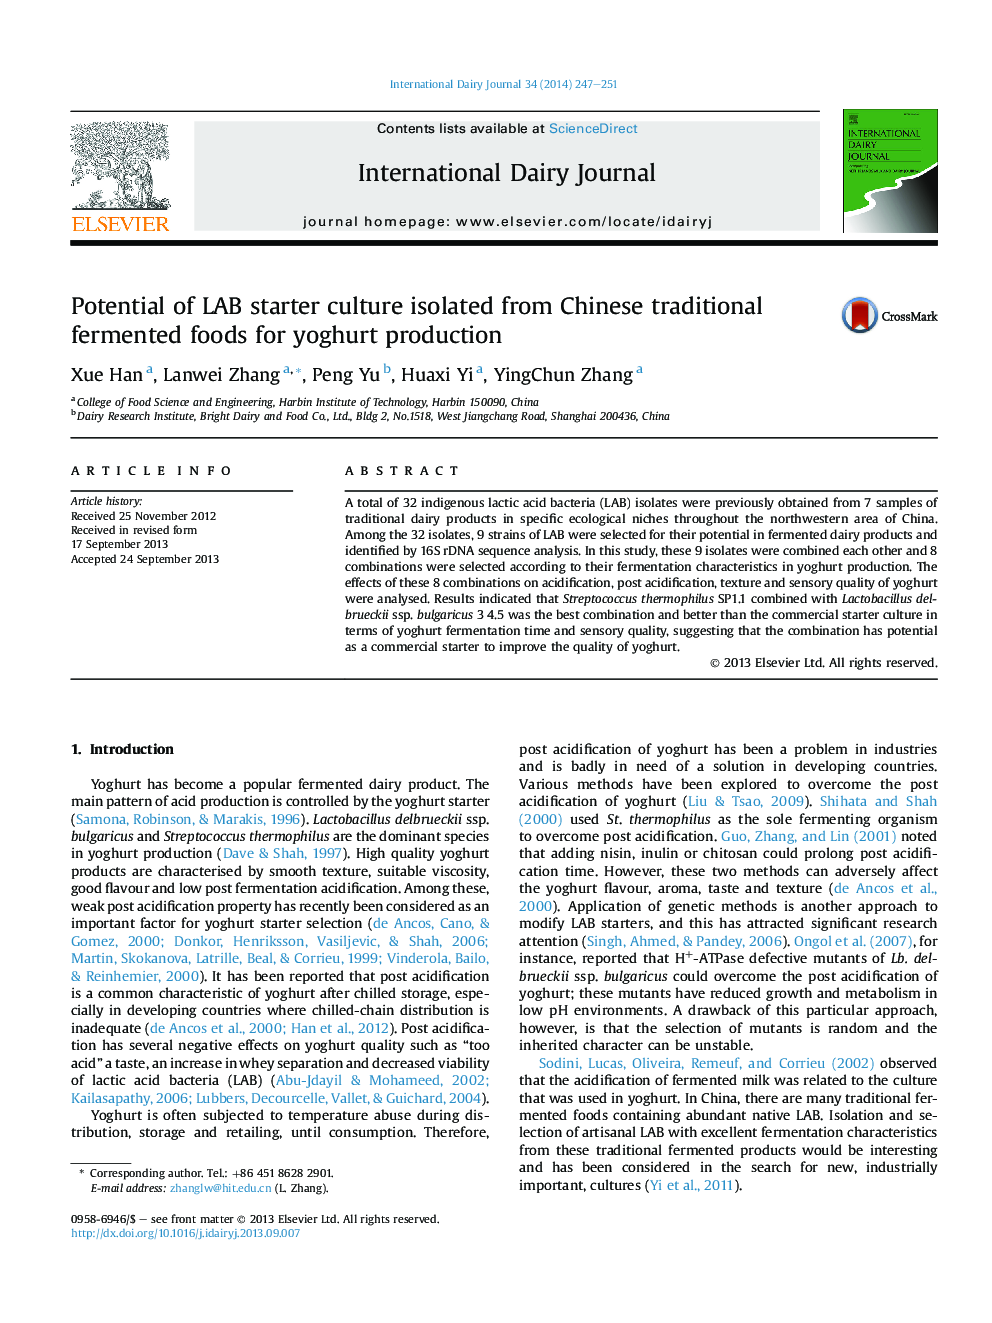 Potential of LAB starter culture isolated from Chinese traditional fermented foods for yoghurt production